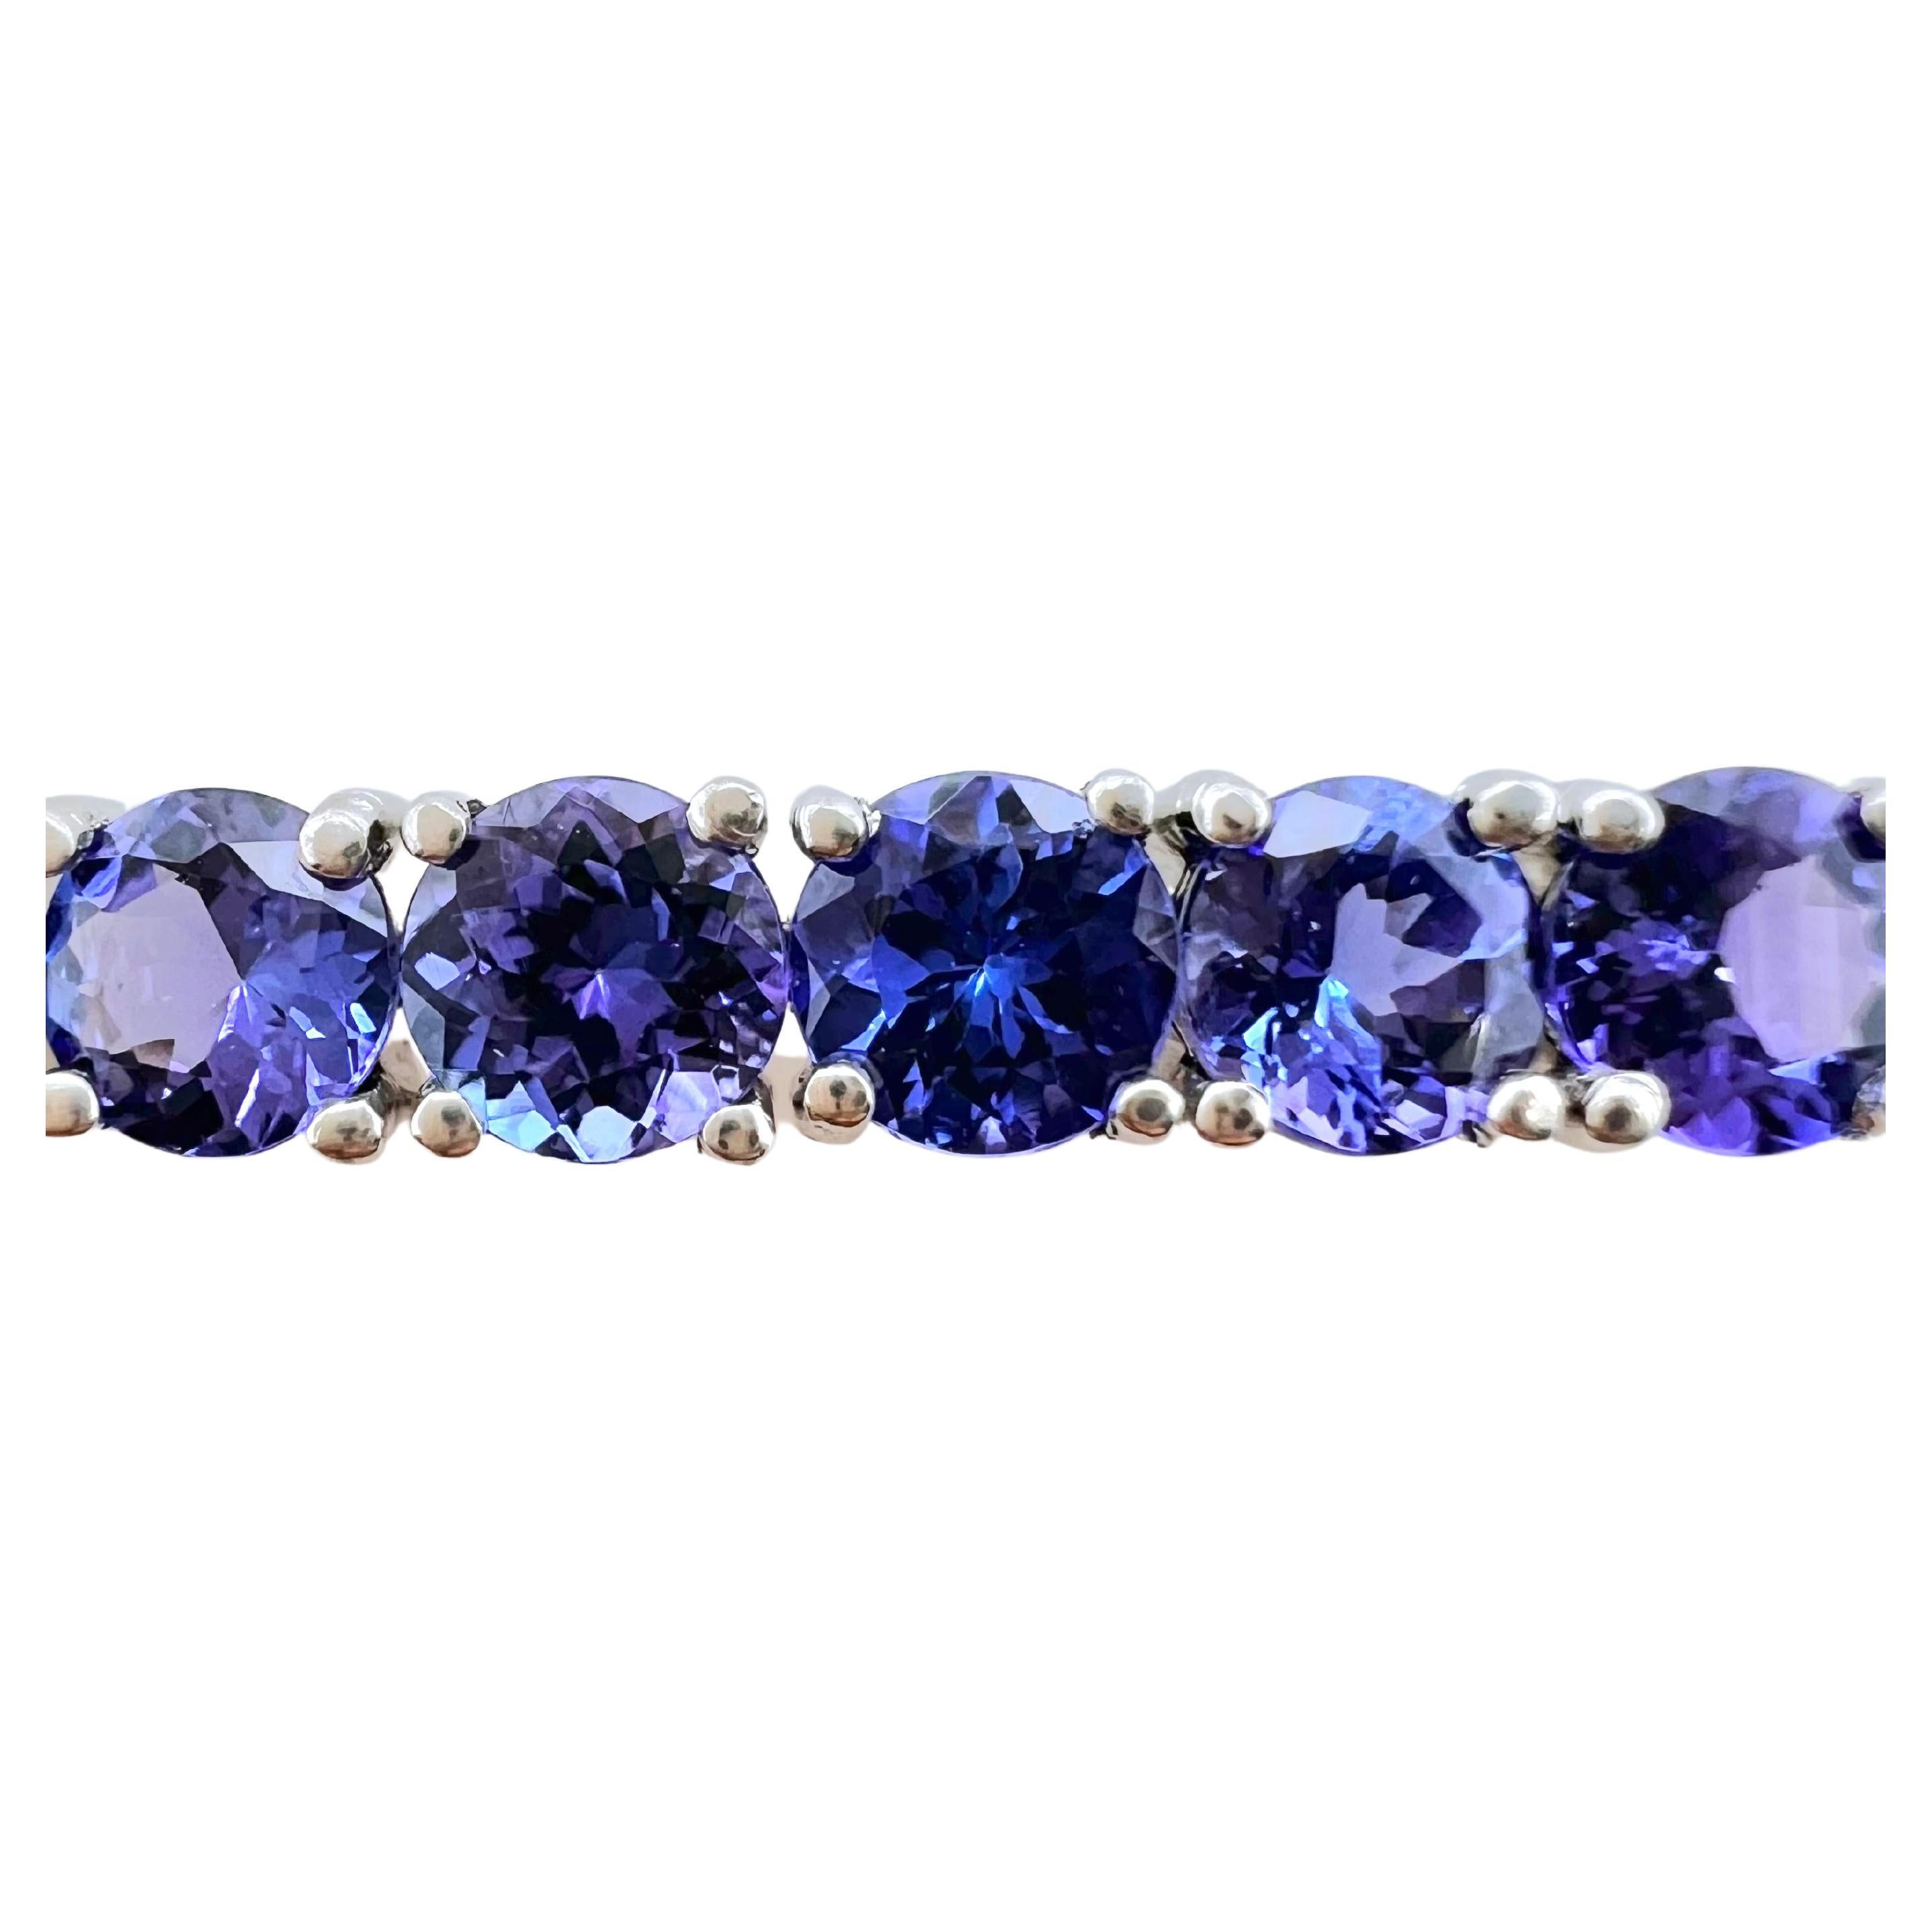 This Tanzanite bracelet is absolutely amazing! A straight line of round cut Tanzanites that just exudes a gorgeous
purple color for your wrist.  The brilliance and fire of the Tanzanites absolutely shows on this platinum setting.  The
time to